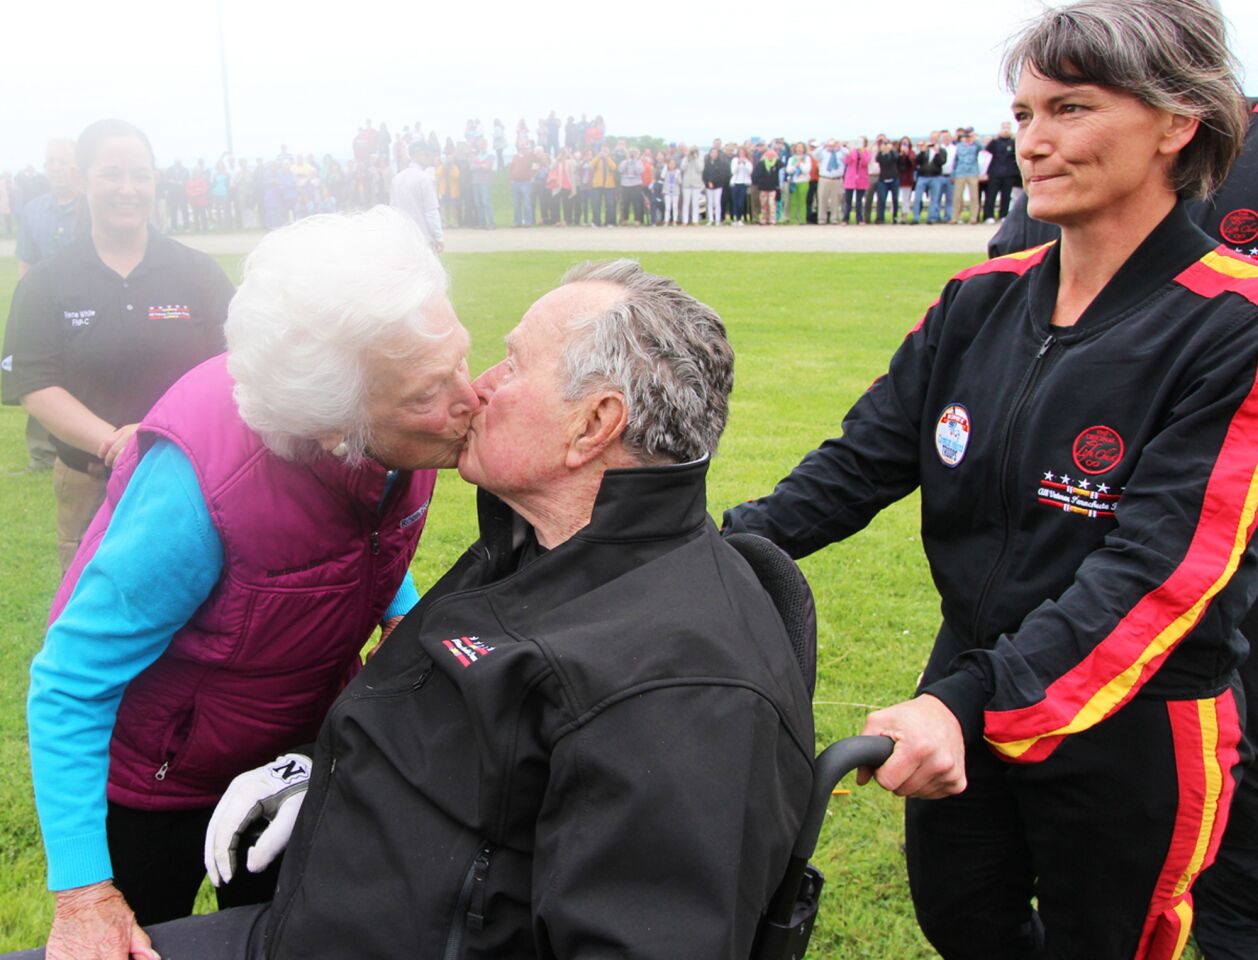 Barbara Bush kisses former President George H.W. Bush after his parachute landing on his 90th birthday in Kennebunkport, Maine, on June 12, 2014.